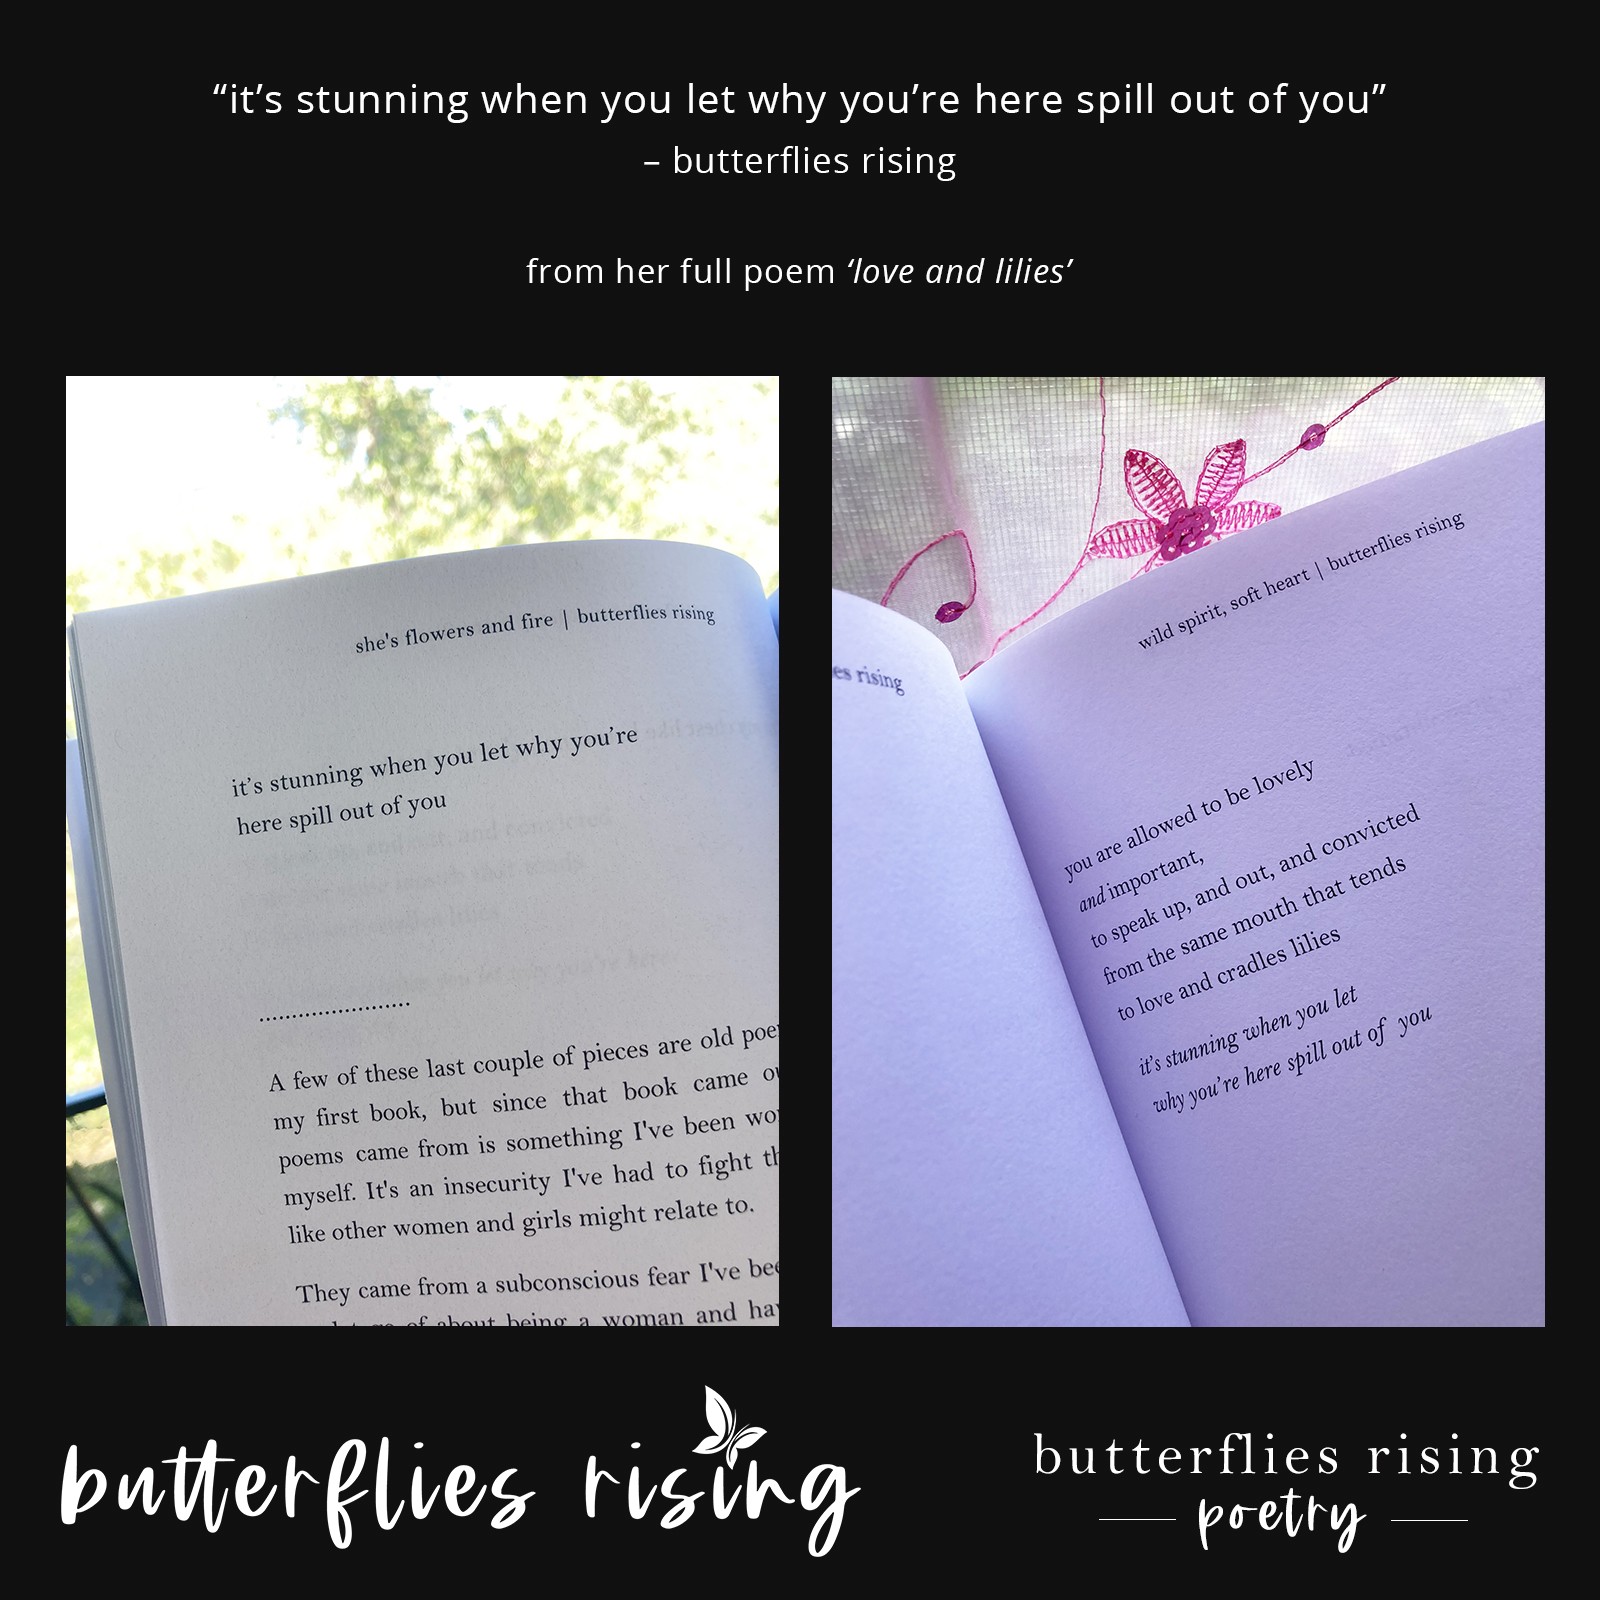 it’s stunning when you let why you’re here spill out of you - butterflies rising